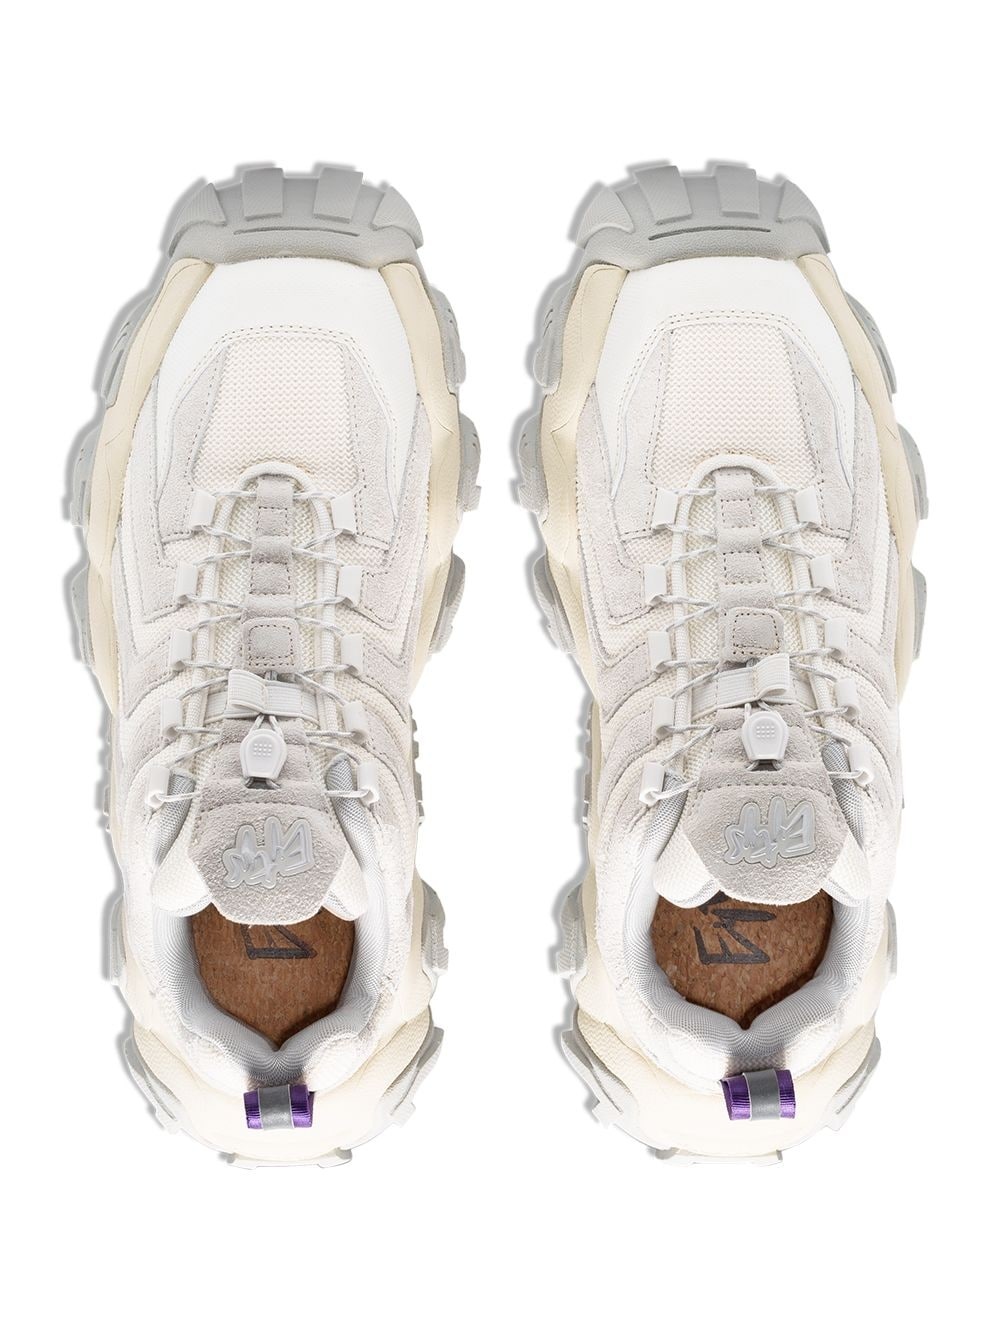 Halo chunky sneakers - 5